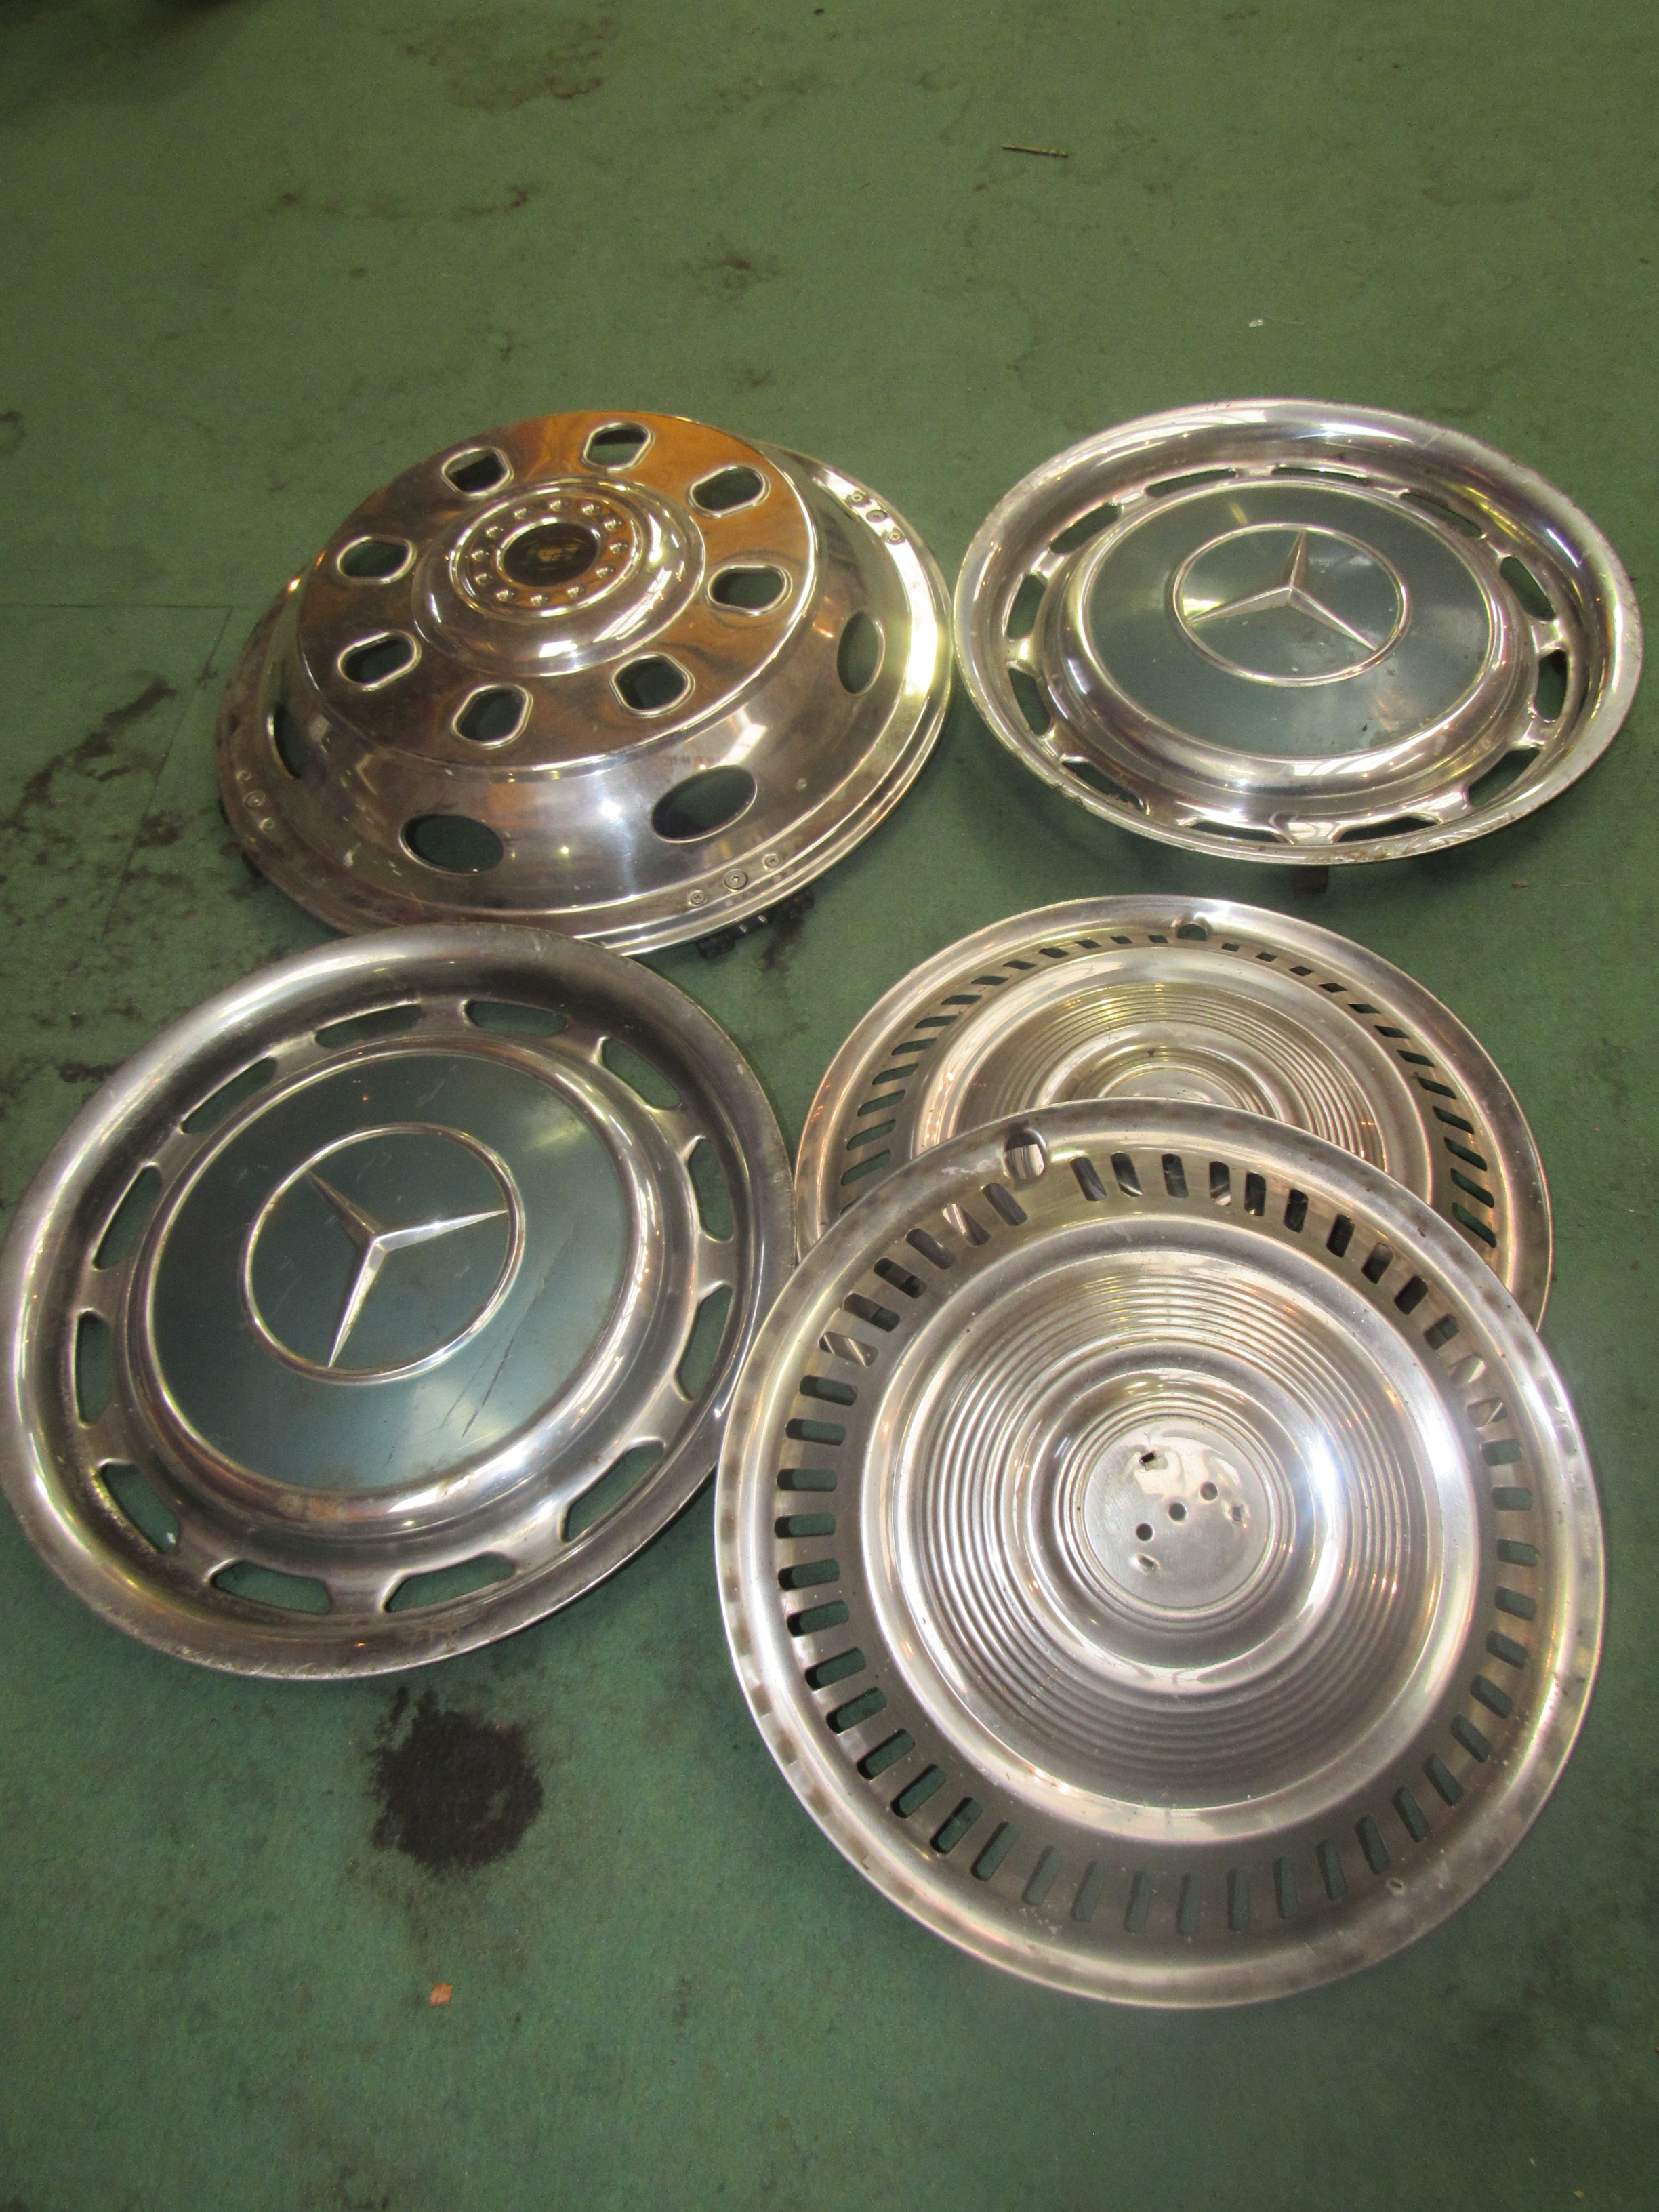 A box of mixed chromed hubcaps